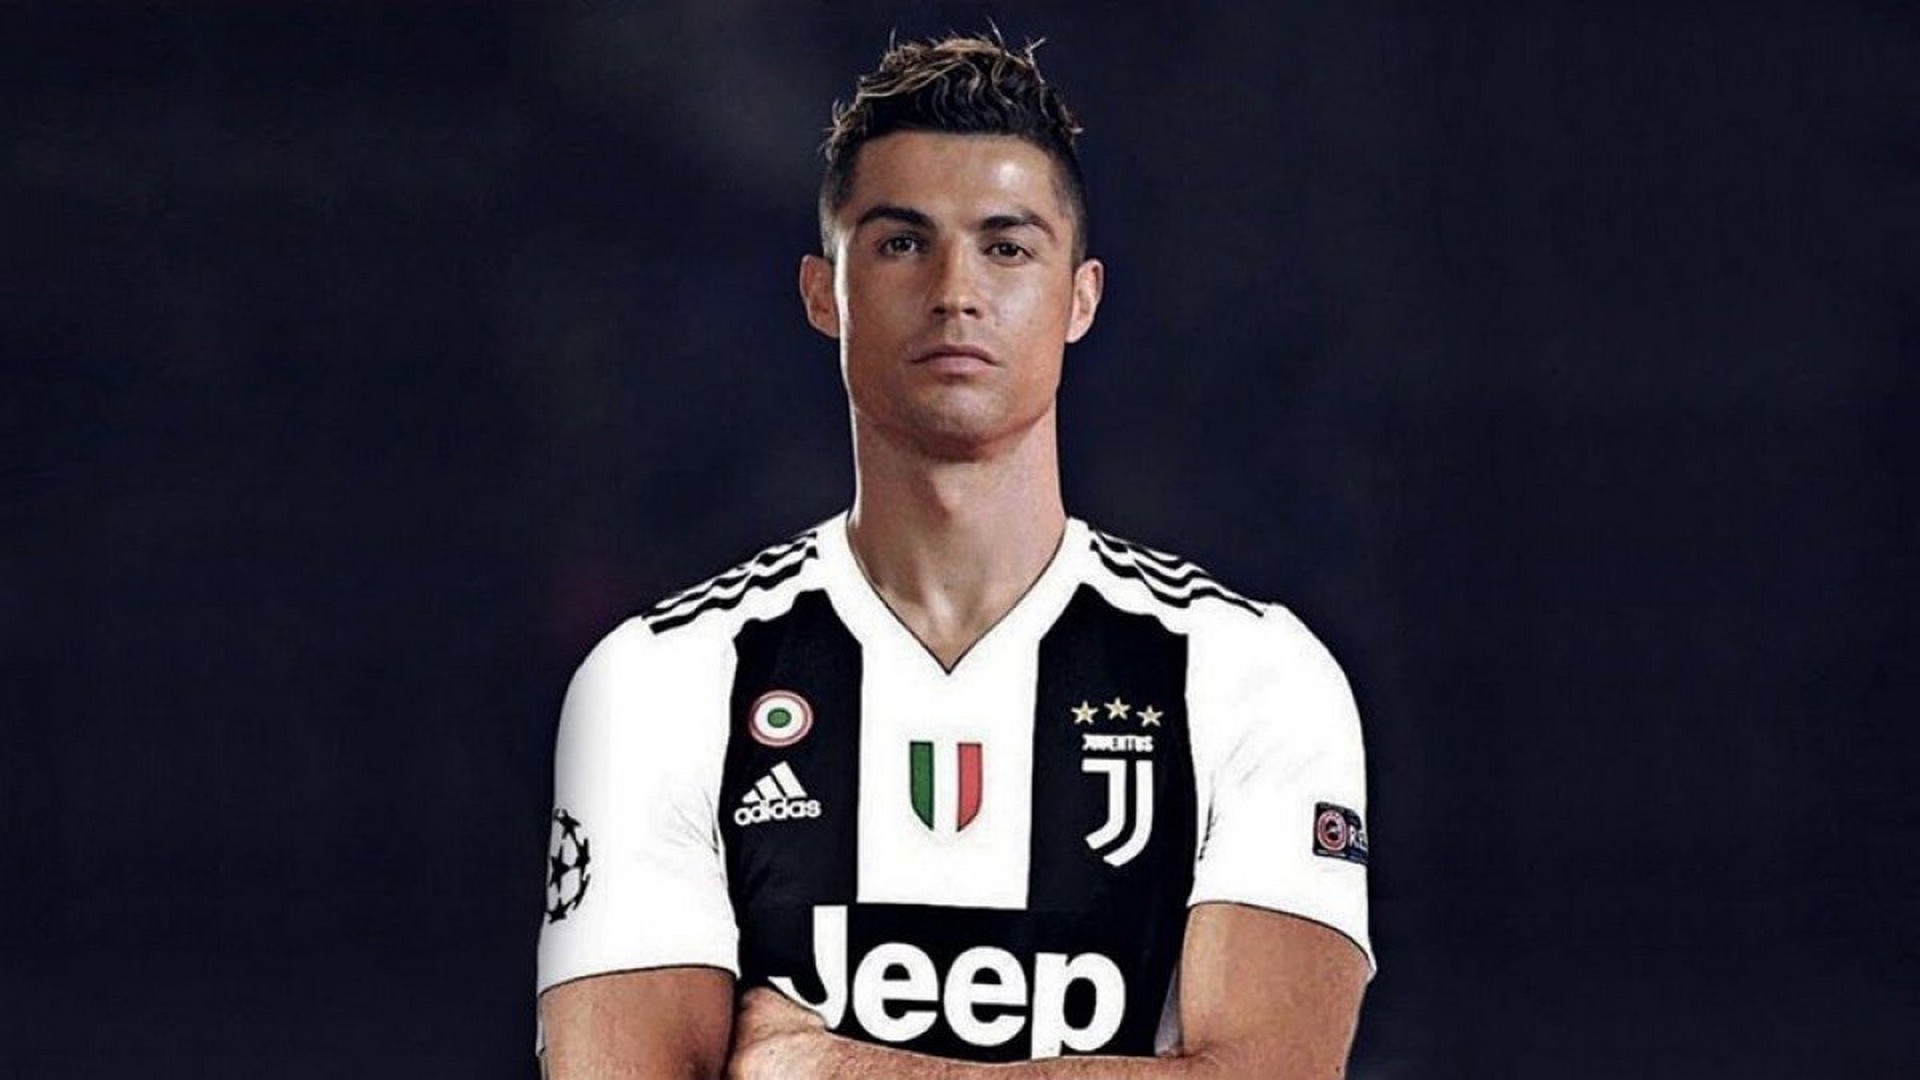 HD Wallpaper CR7 Juventus with image resolution 1920x1080 pixel. You can make this wallpaper for your Desktop Computer Backgrounds, Mac Wallpapers, Android Lock screen or iPhone Screensavers